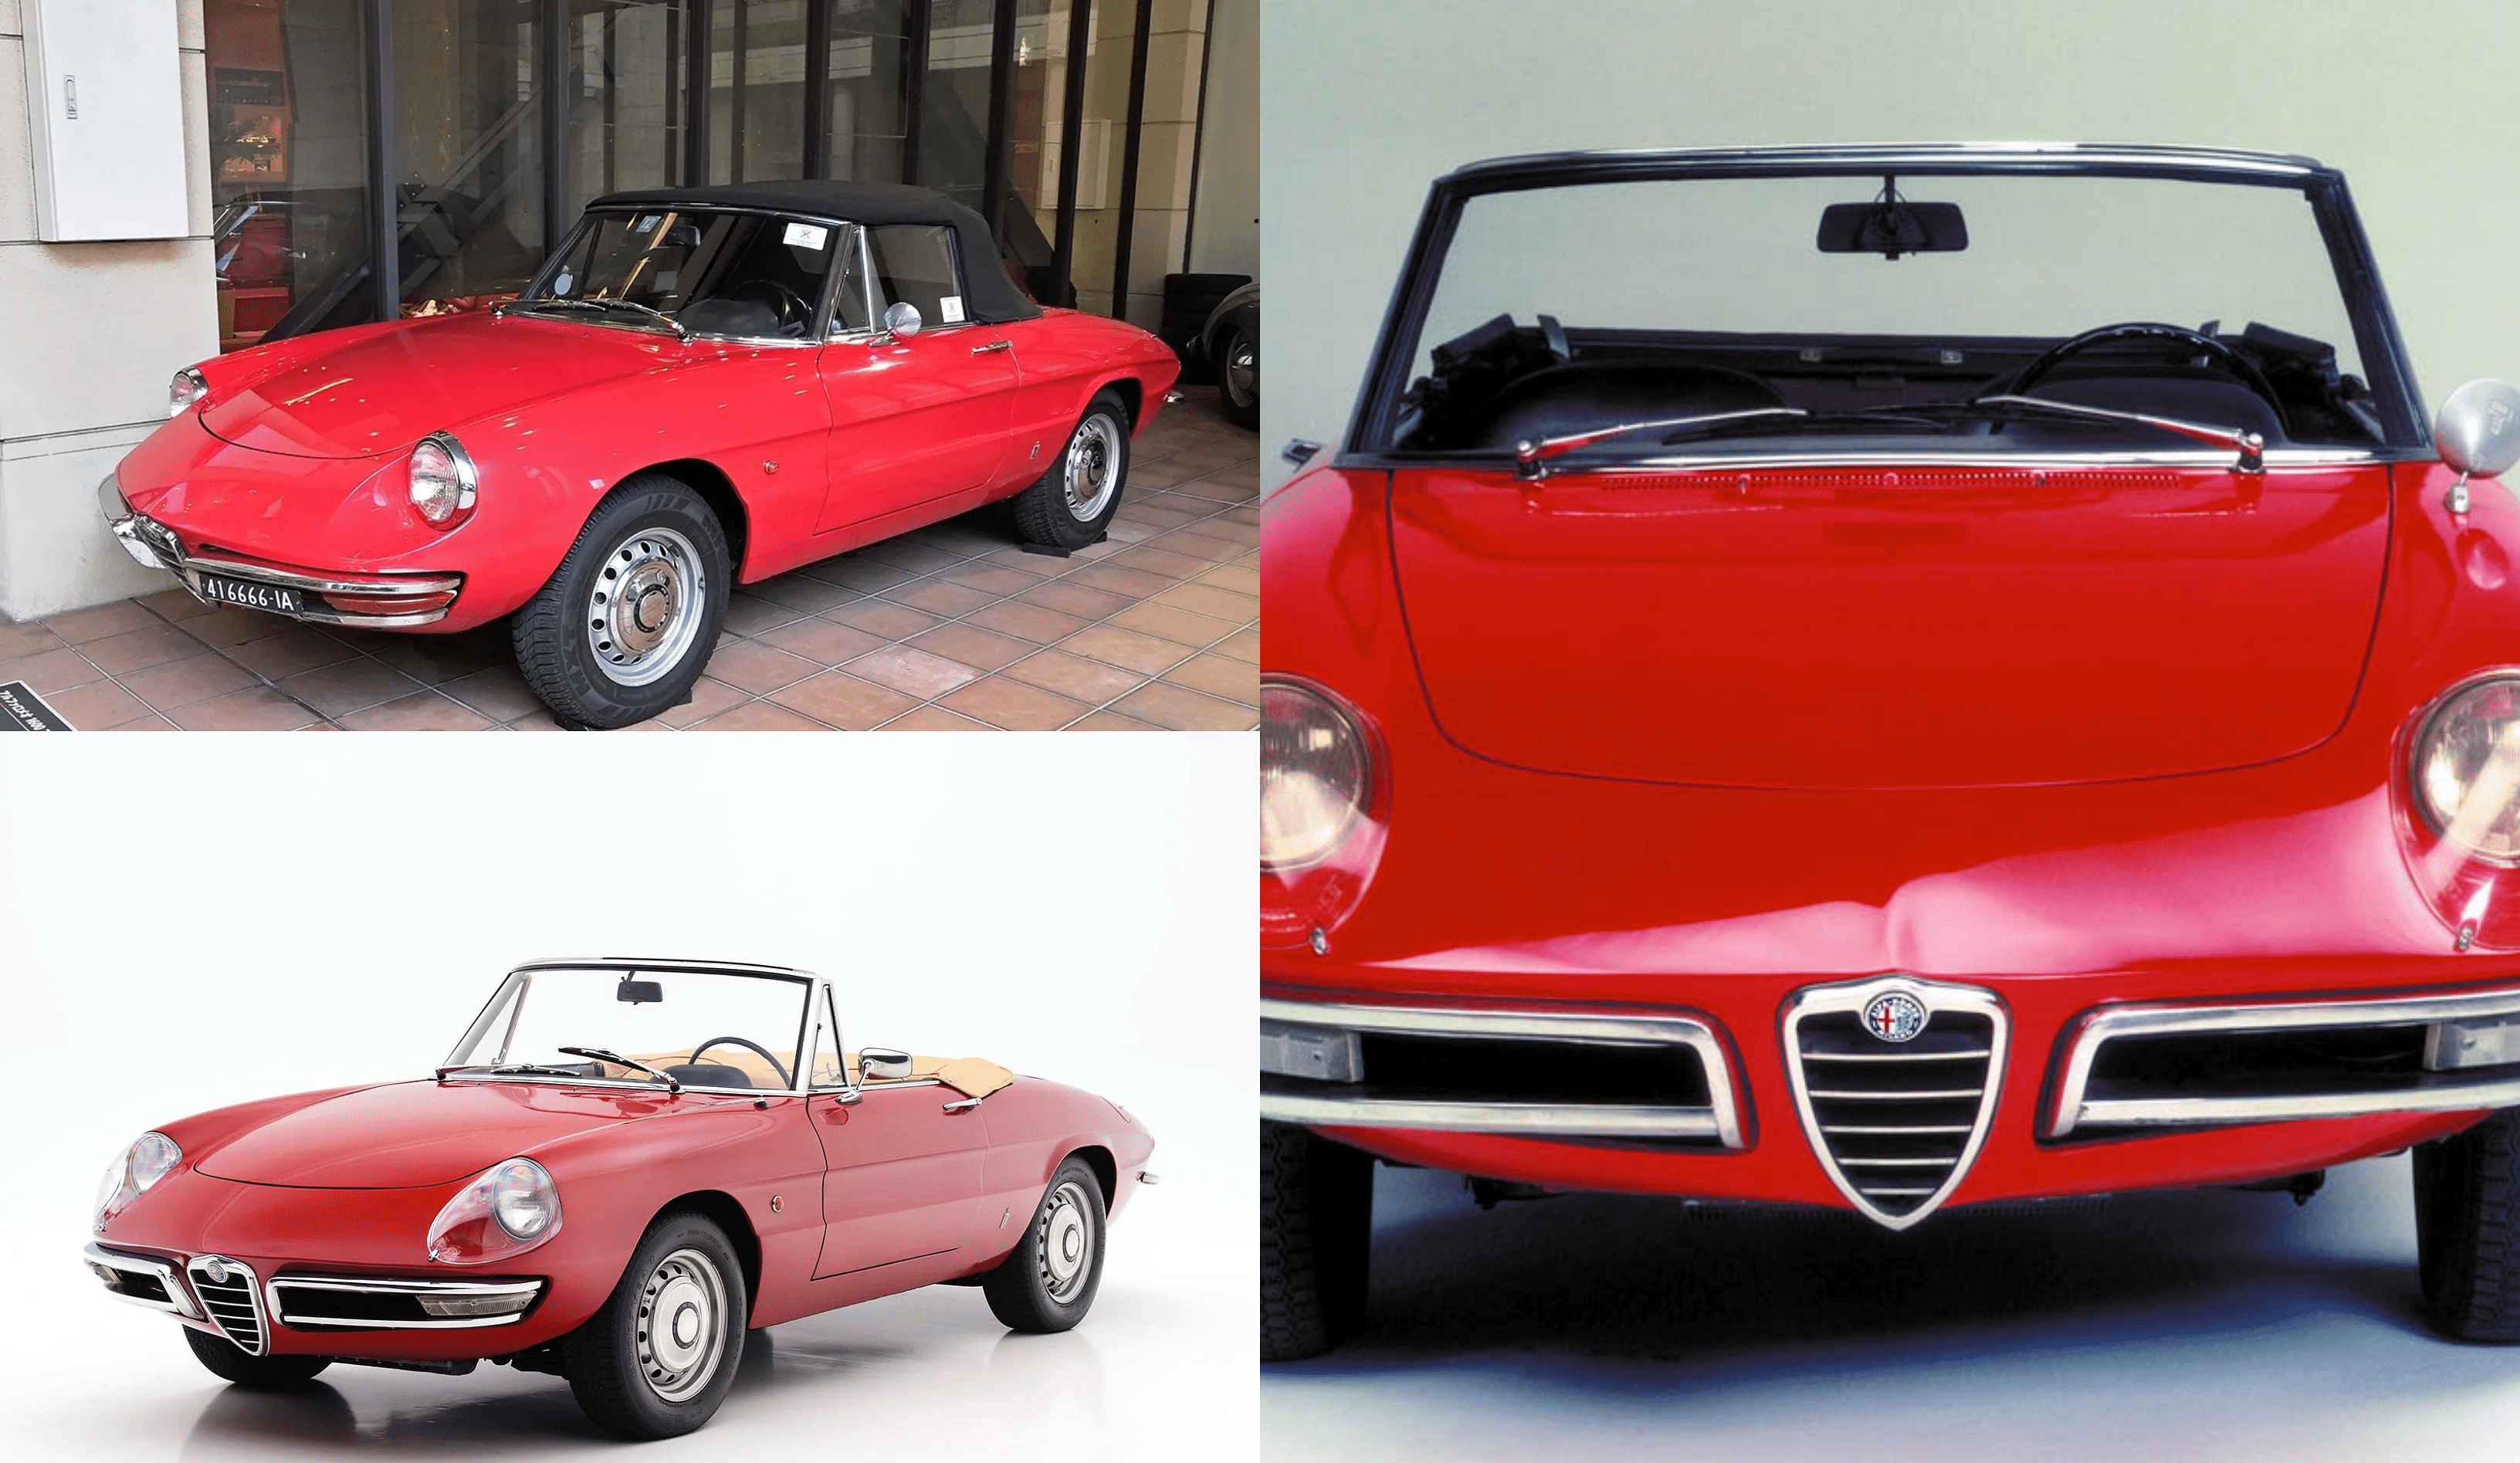 The Alfa Romeo Spider Series 1 front and side view